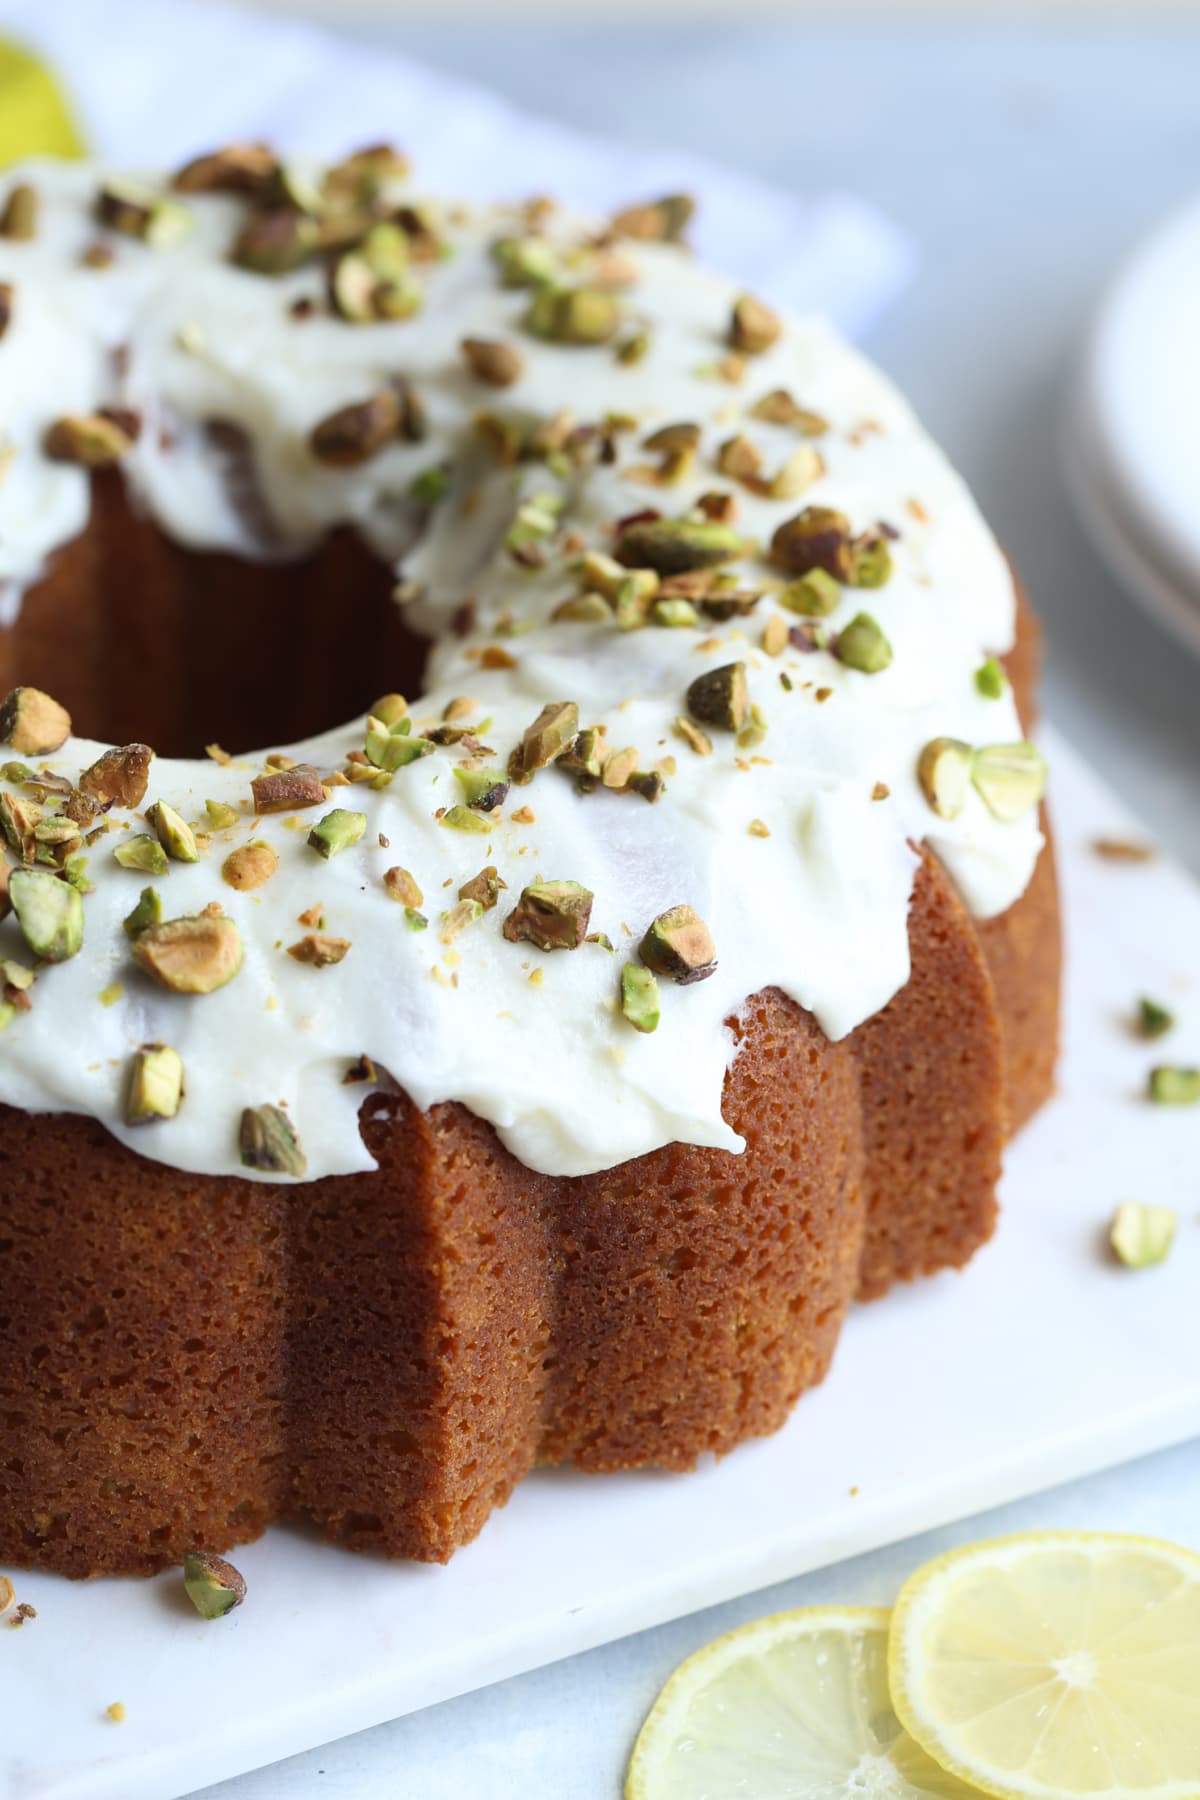 Pistachio Bundt Cake topped with white icing and chopped pistachios on a white serving plate.